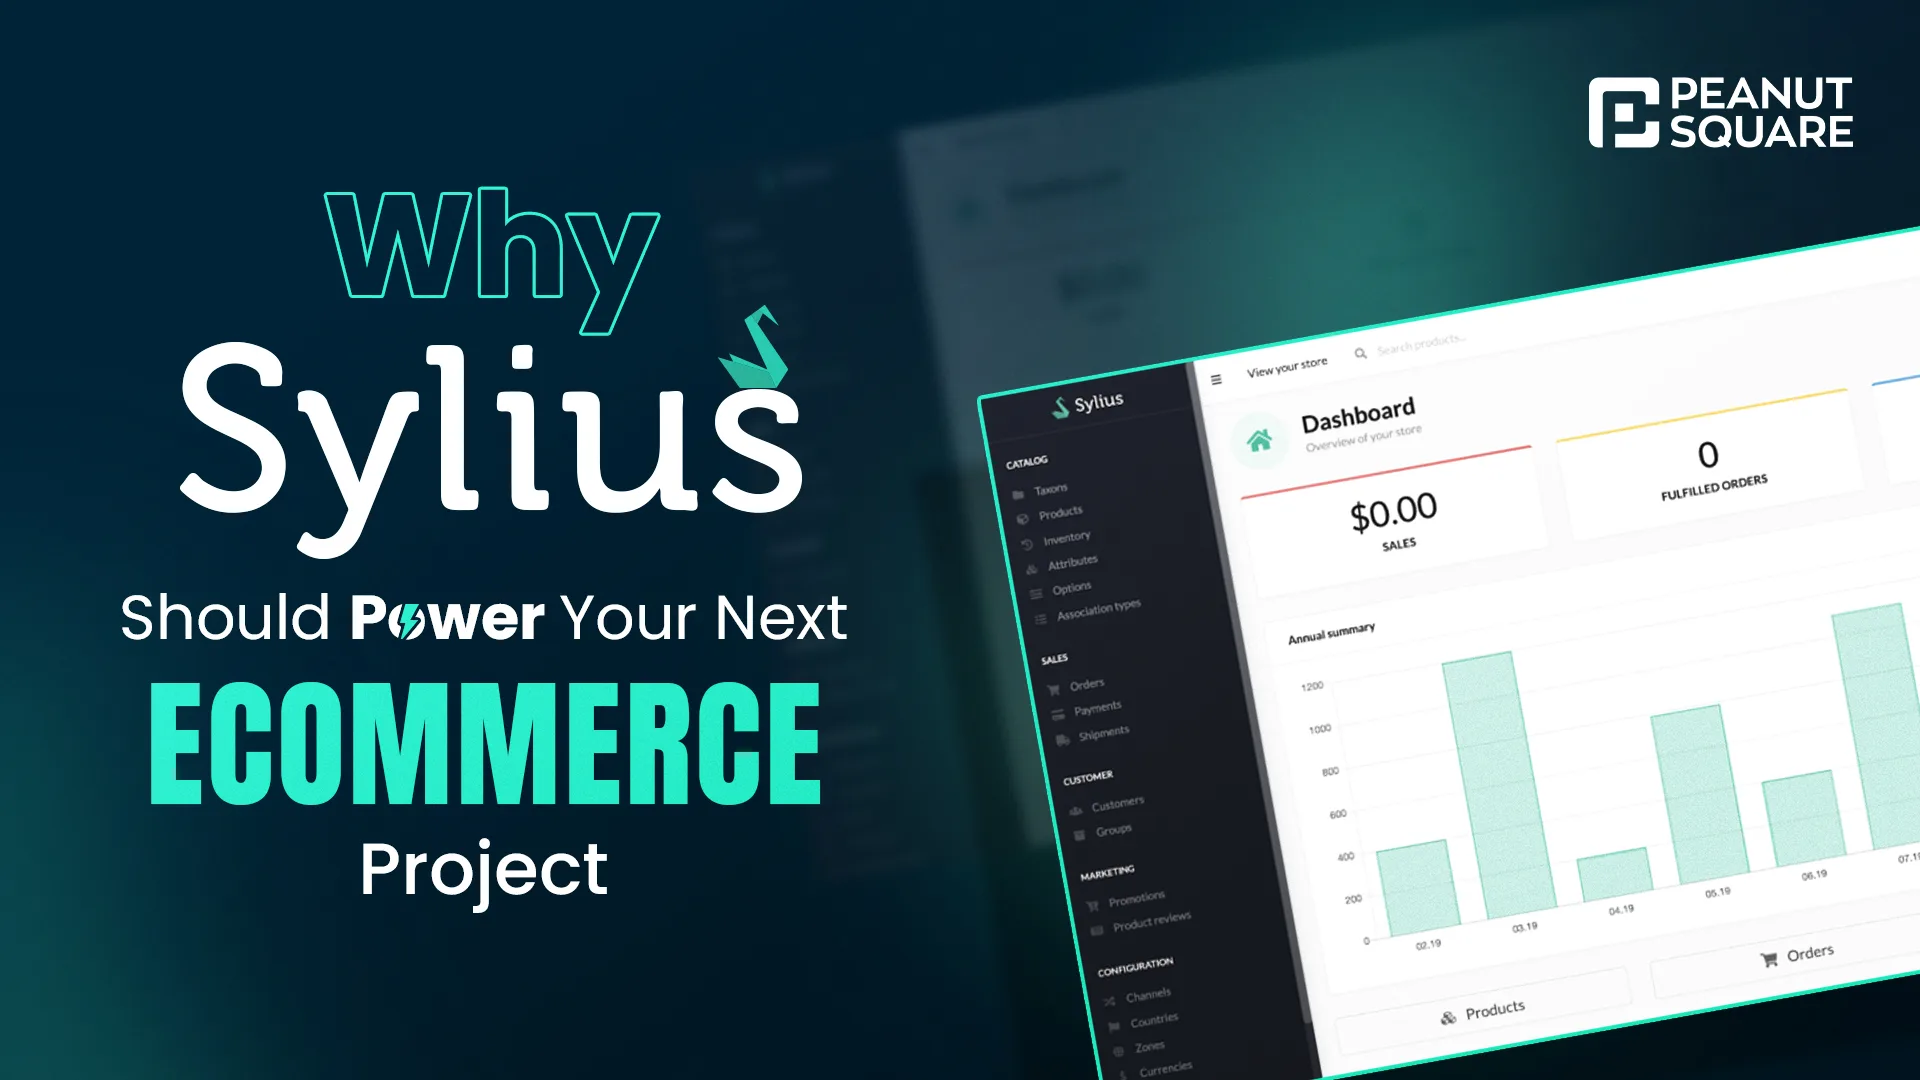 Why-Sylius-Should-Power-Your-Next-Ecommerce-Project